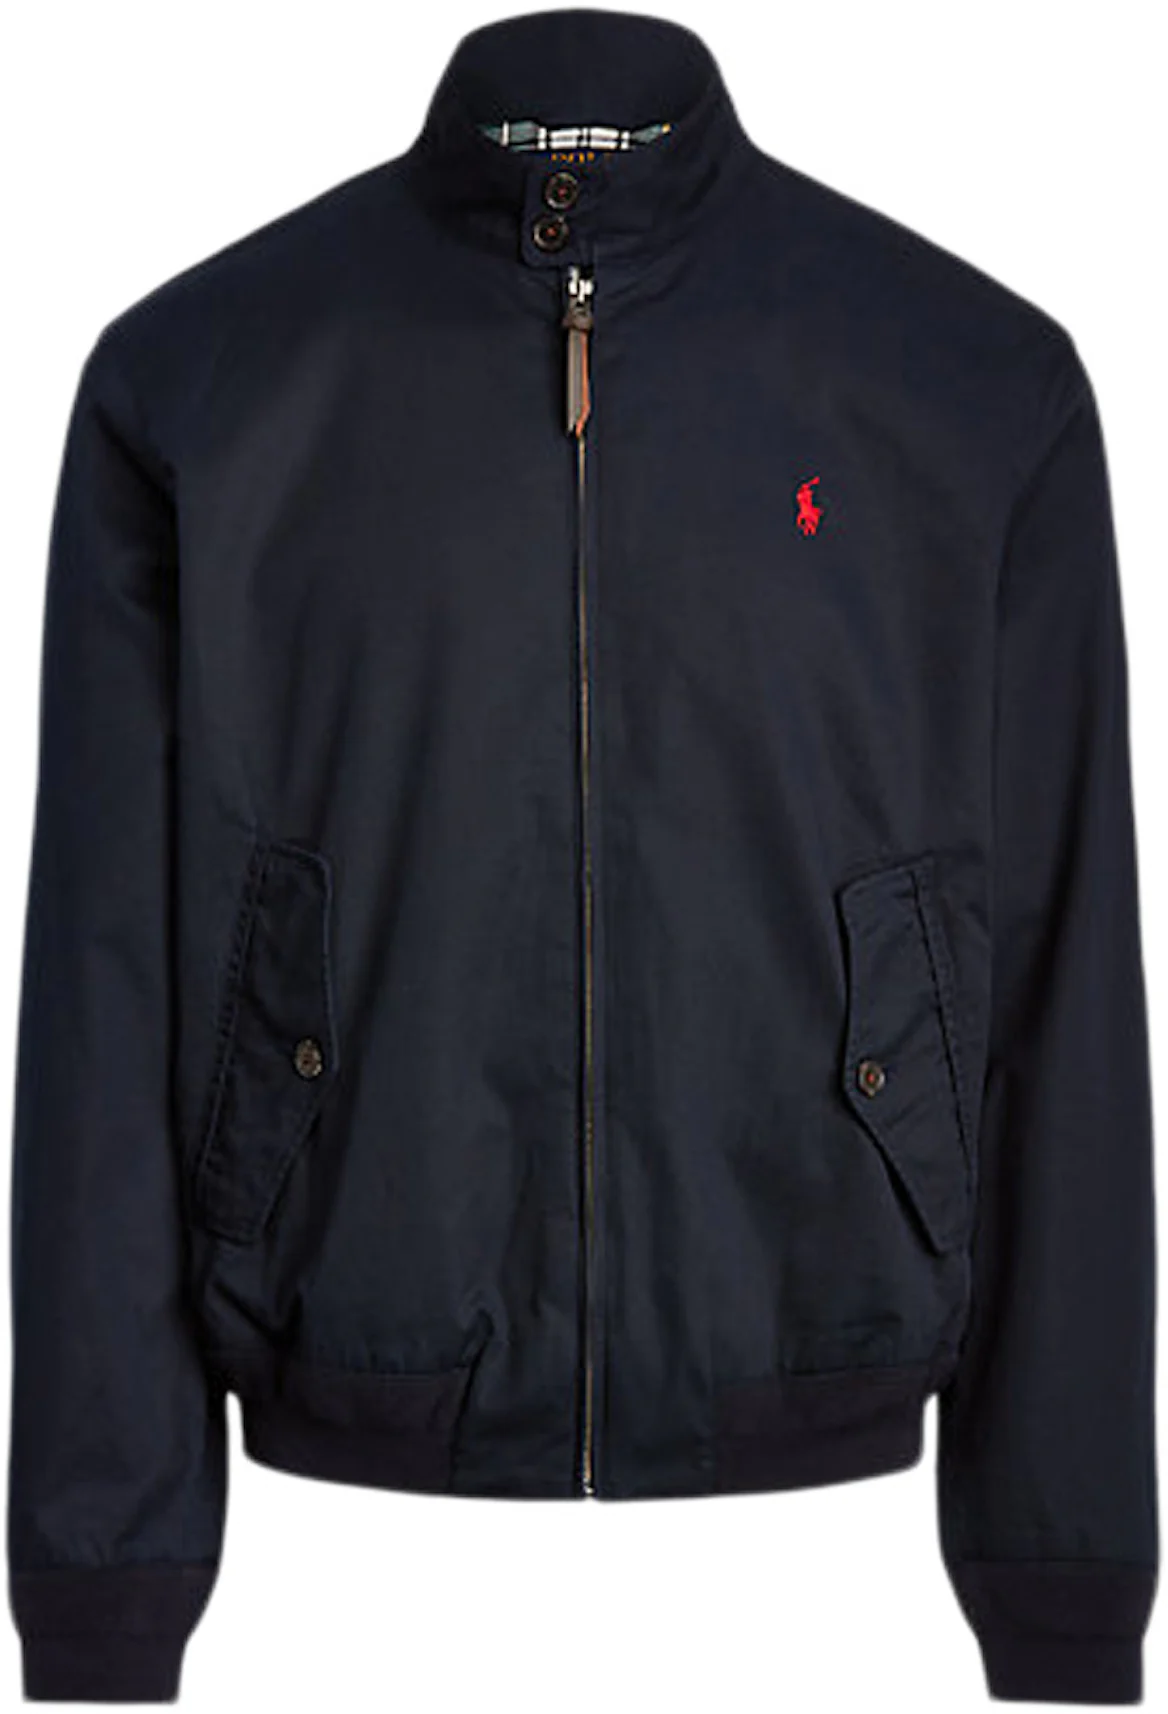 Polo Ralph Lauren Cotton Twill Jacket Collection Navy/Red Men's - US